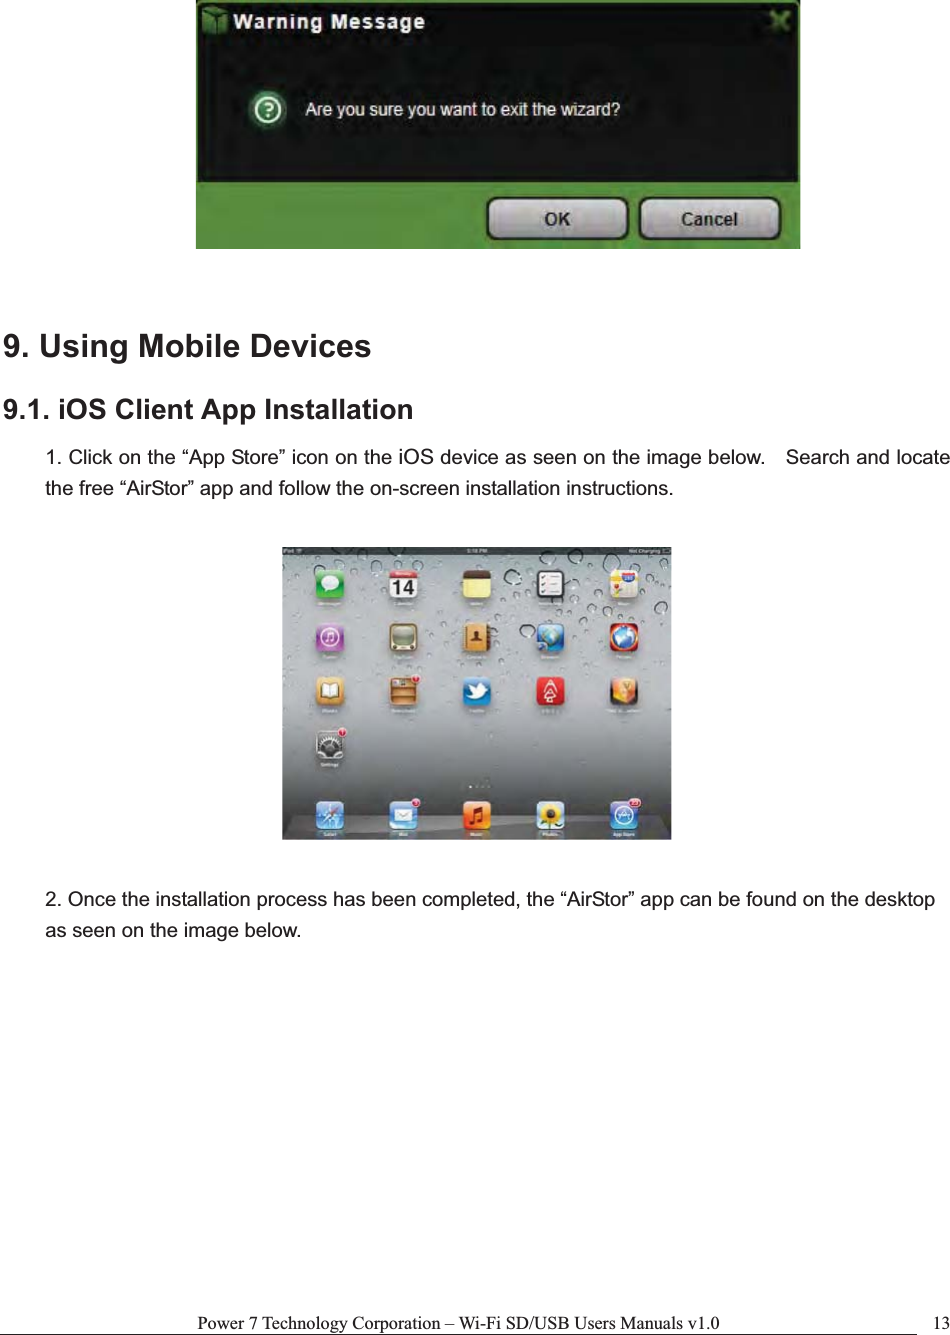 Power 7 Technology Corporation – Wi-Fi SD/USB Users Manuals v1.0  139. Using Mobile Devices 9.1. iOS Client App Installation 1. Click on the “App Store” icon on the iOS device as seen on the image below.    Search and locate the free “AirStor” app and follow the on-screen installation instructions. 2. Once the installation process has been completed, the “AirStor” app can be found on the desktop as seen on the image below. 